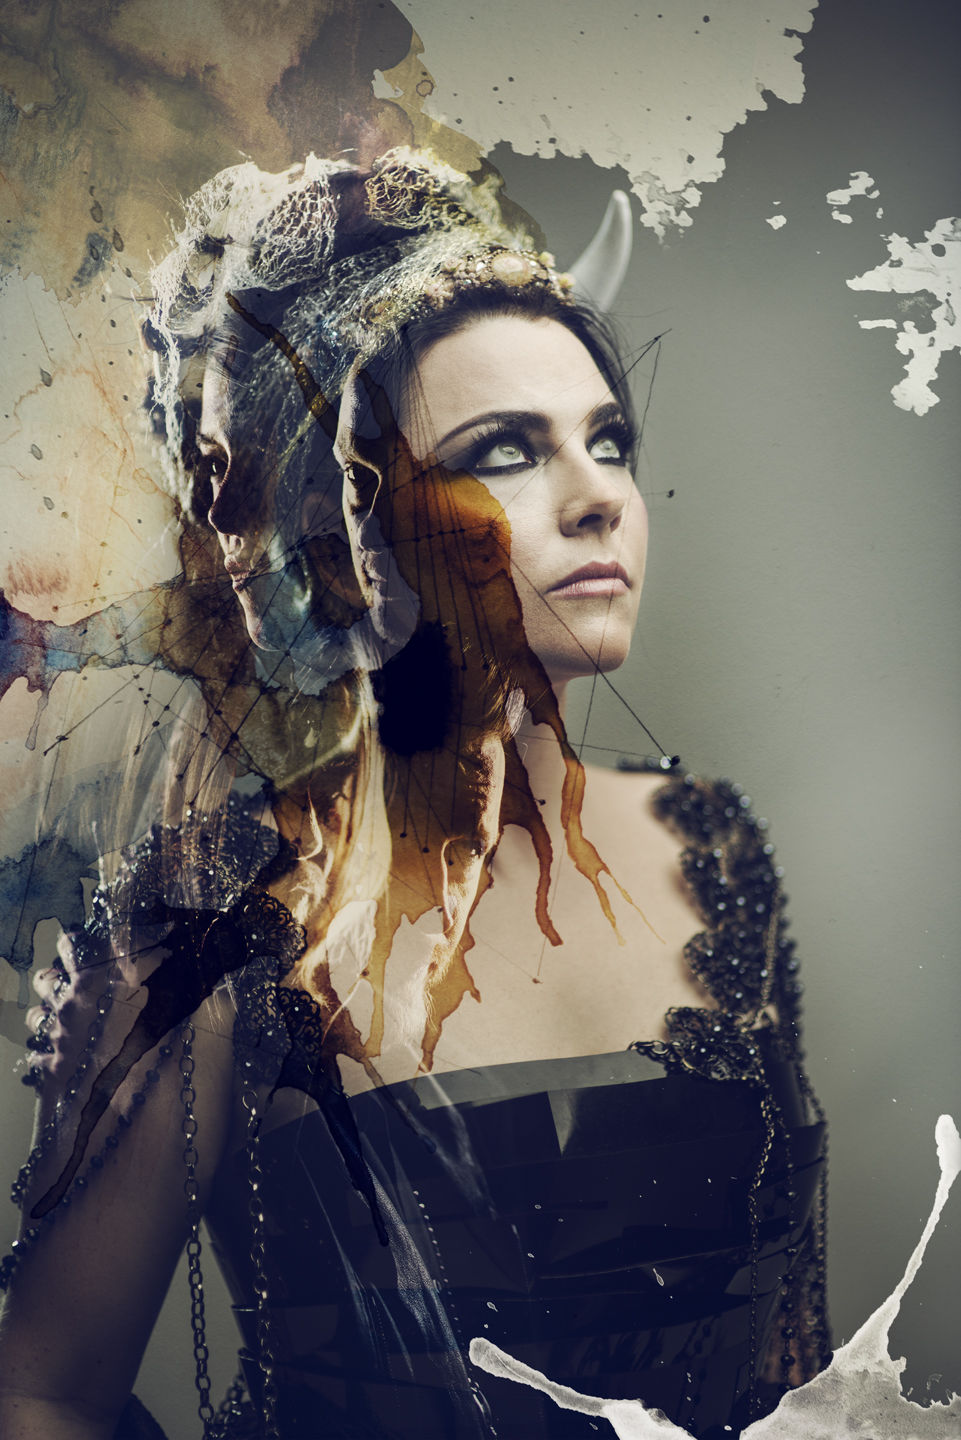 Evanescence and singer Amy Lee realize their symphonic ambitions on new  'Synthesis' album, tour, Keith Spera